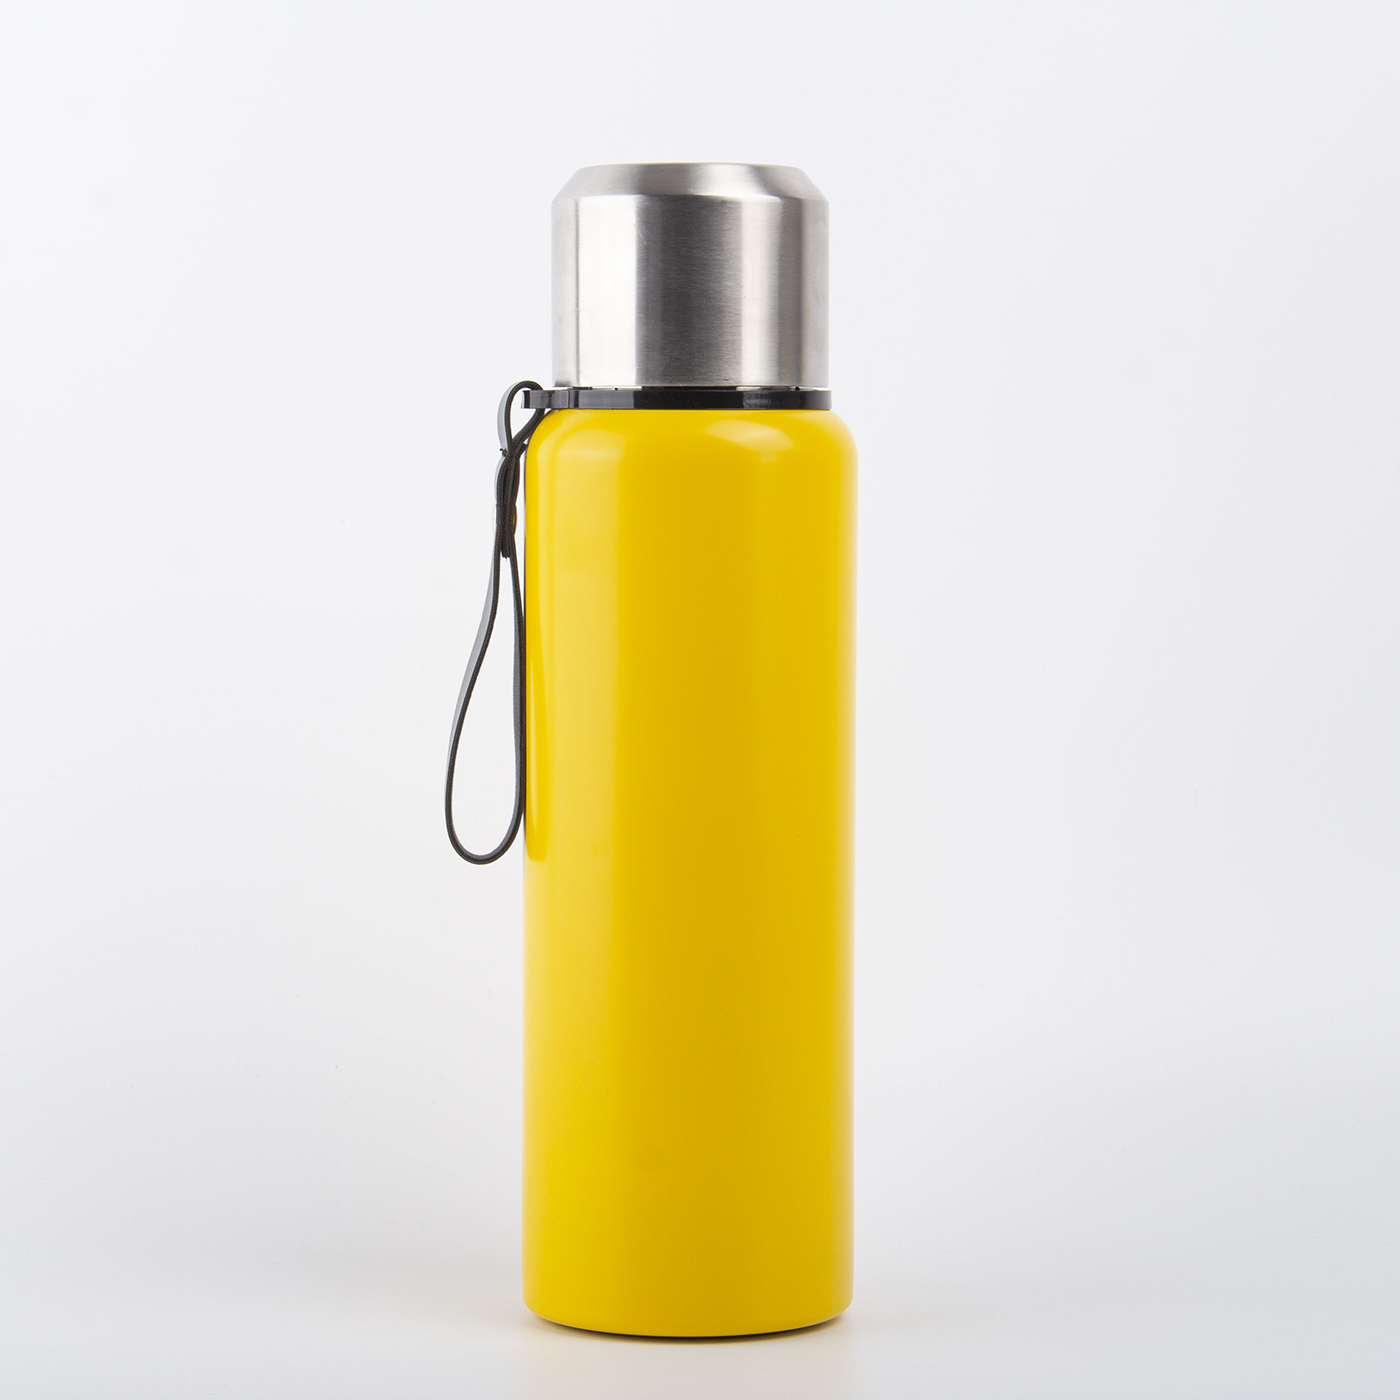 26 oz. Double Wall Vacuum Insulated Thermos Flask3